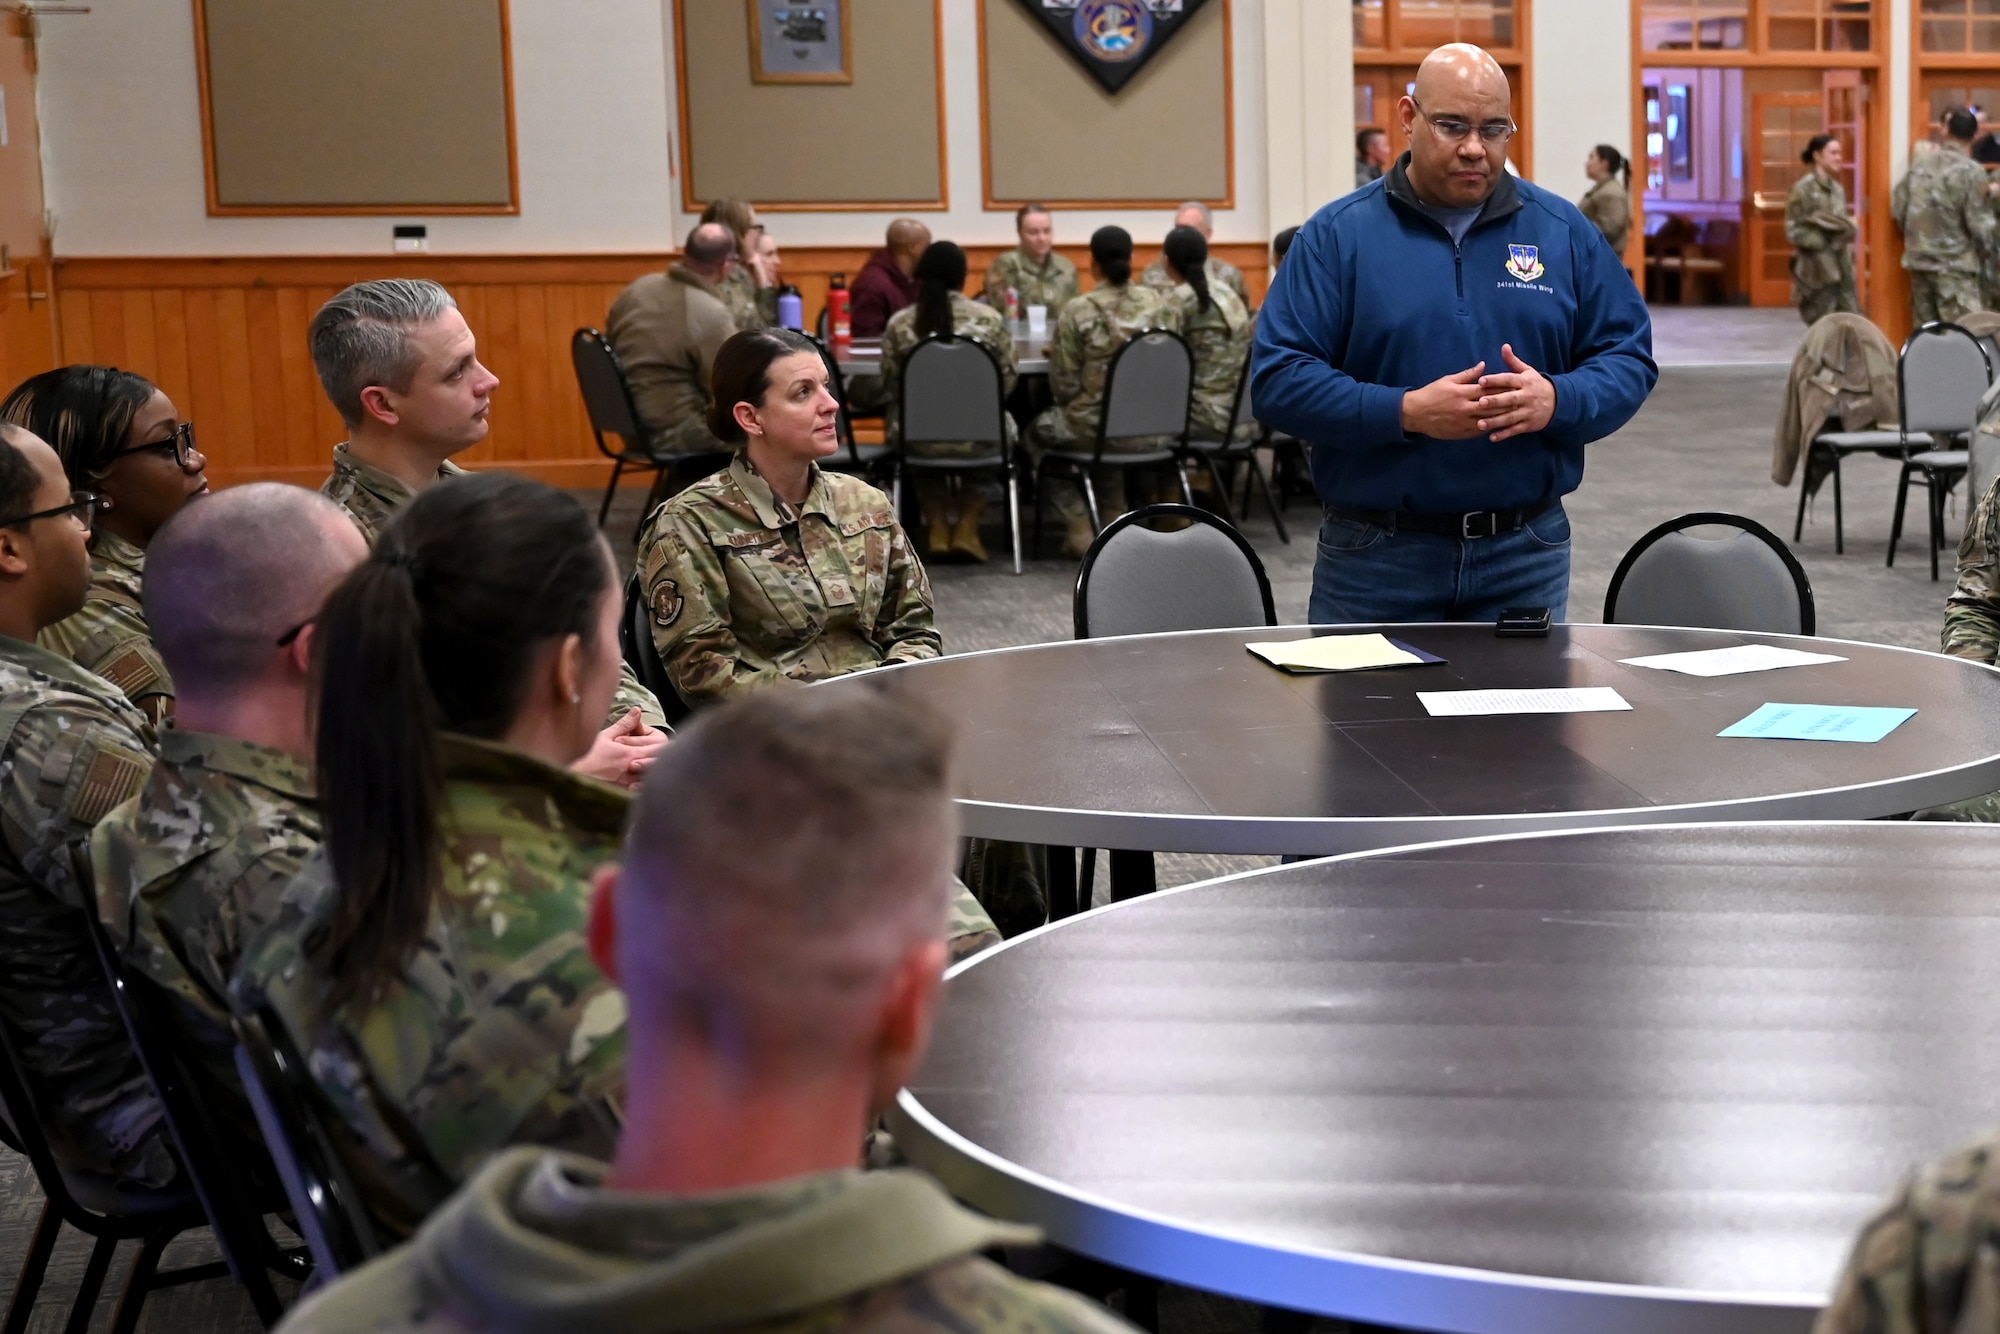 Airmen participate in a guided discussion during a MLK remembrance event.